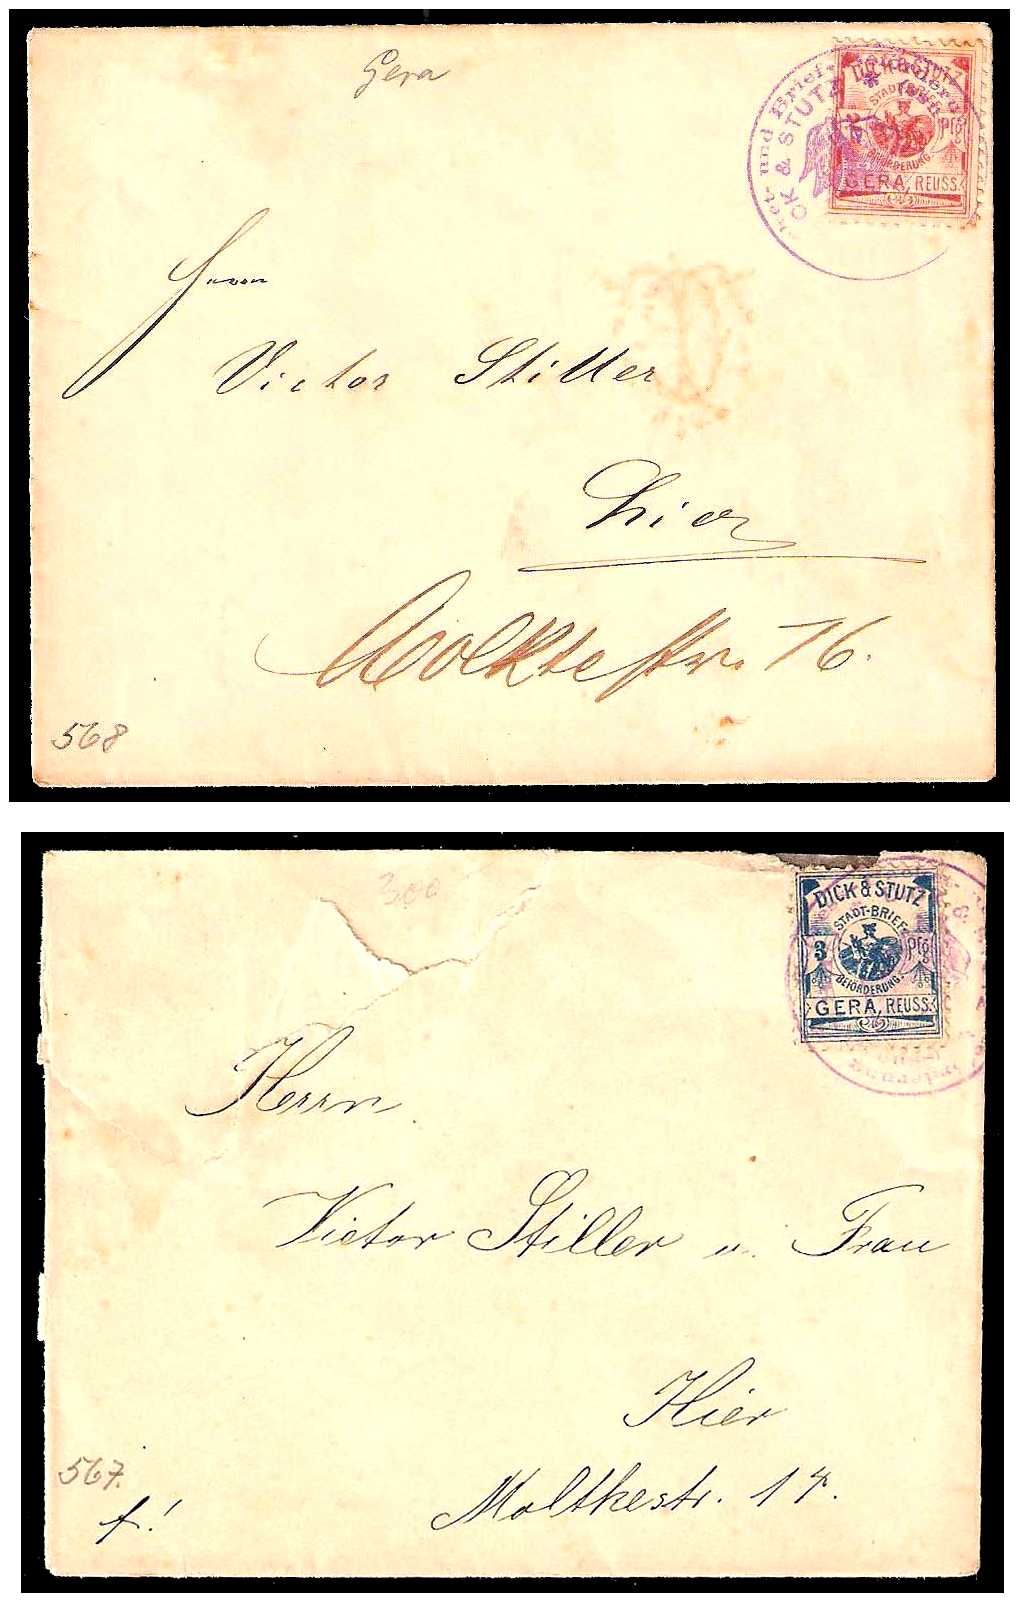 11.1890 Germany Private Mail Gera Mi B 11/12 collection 01